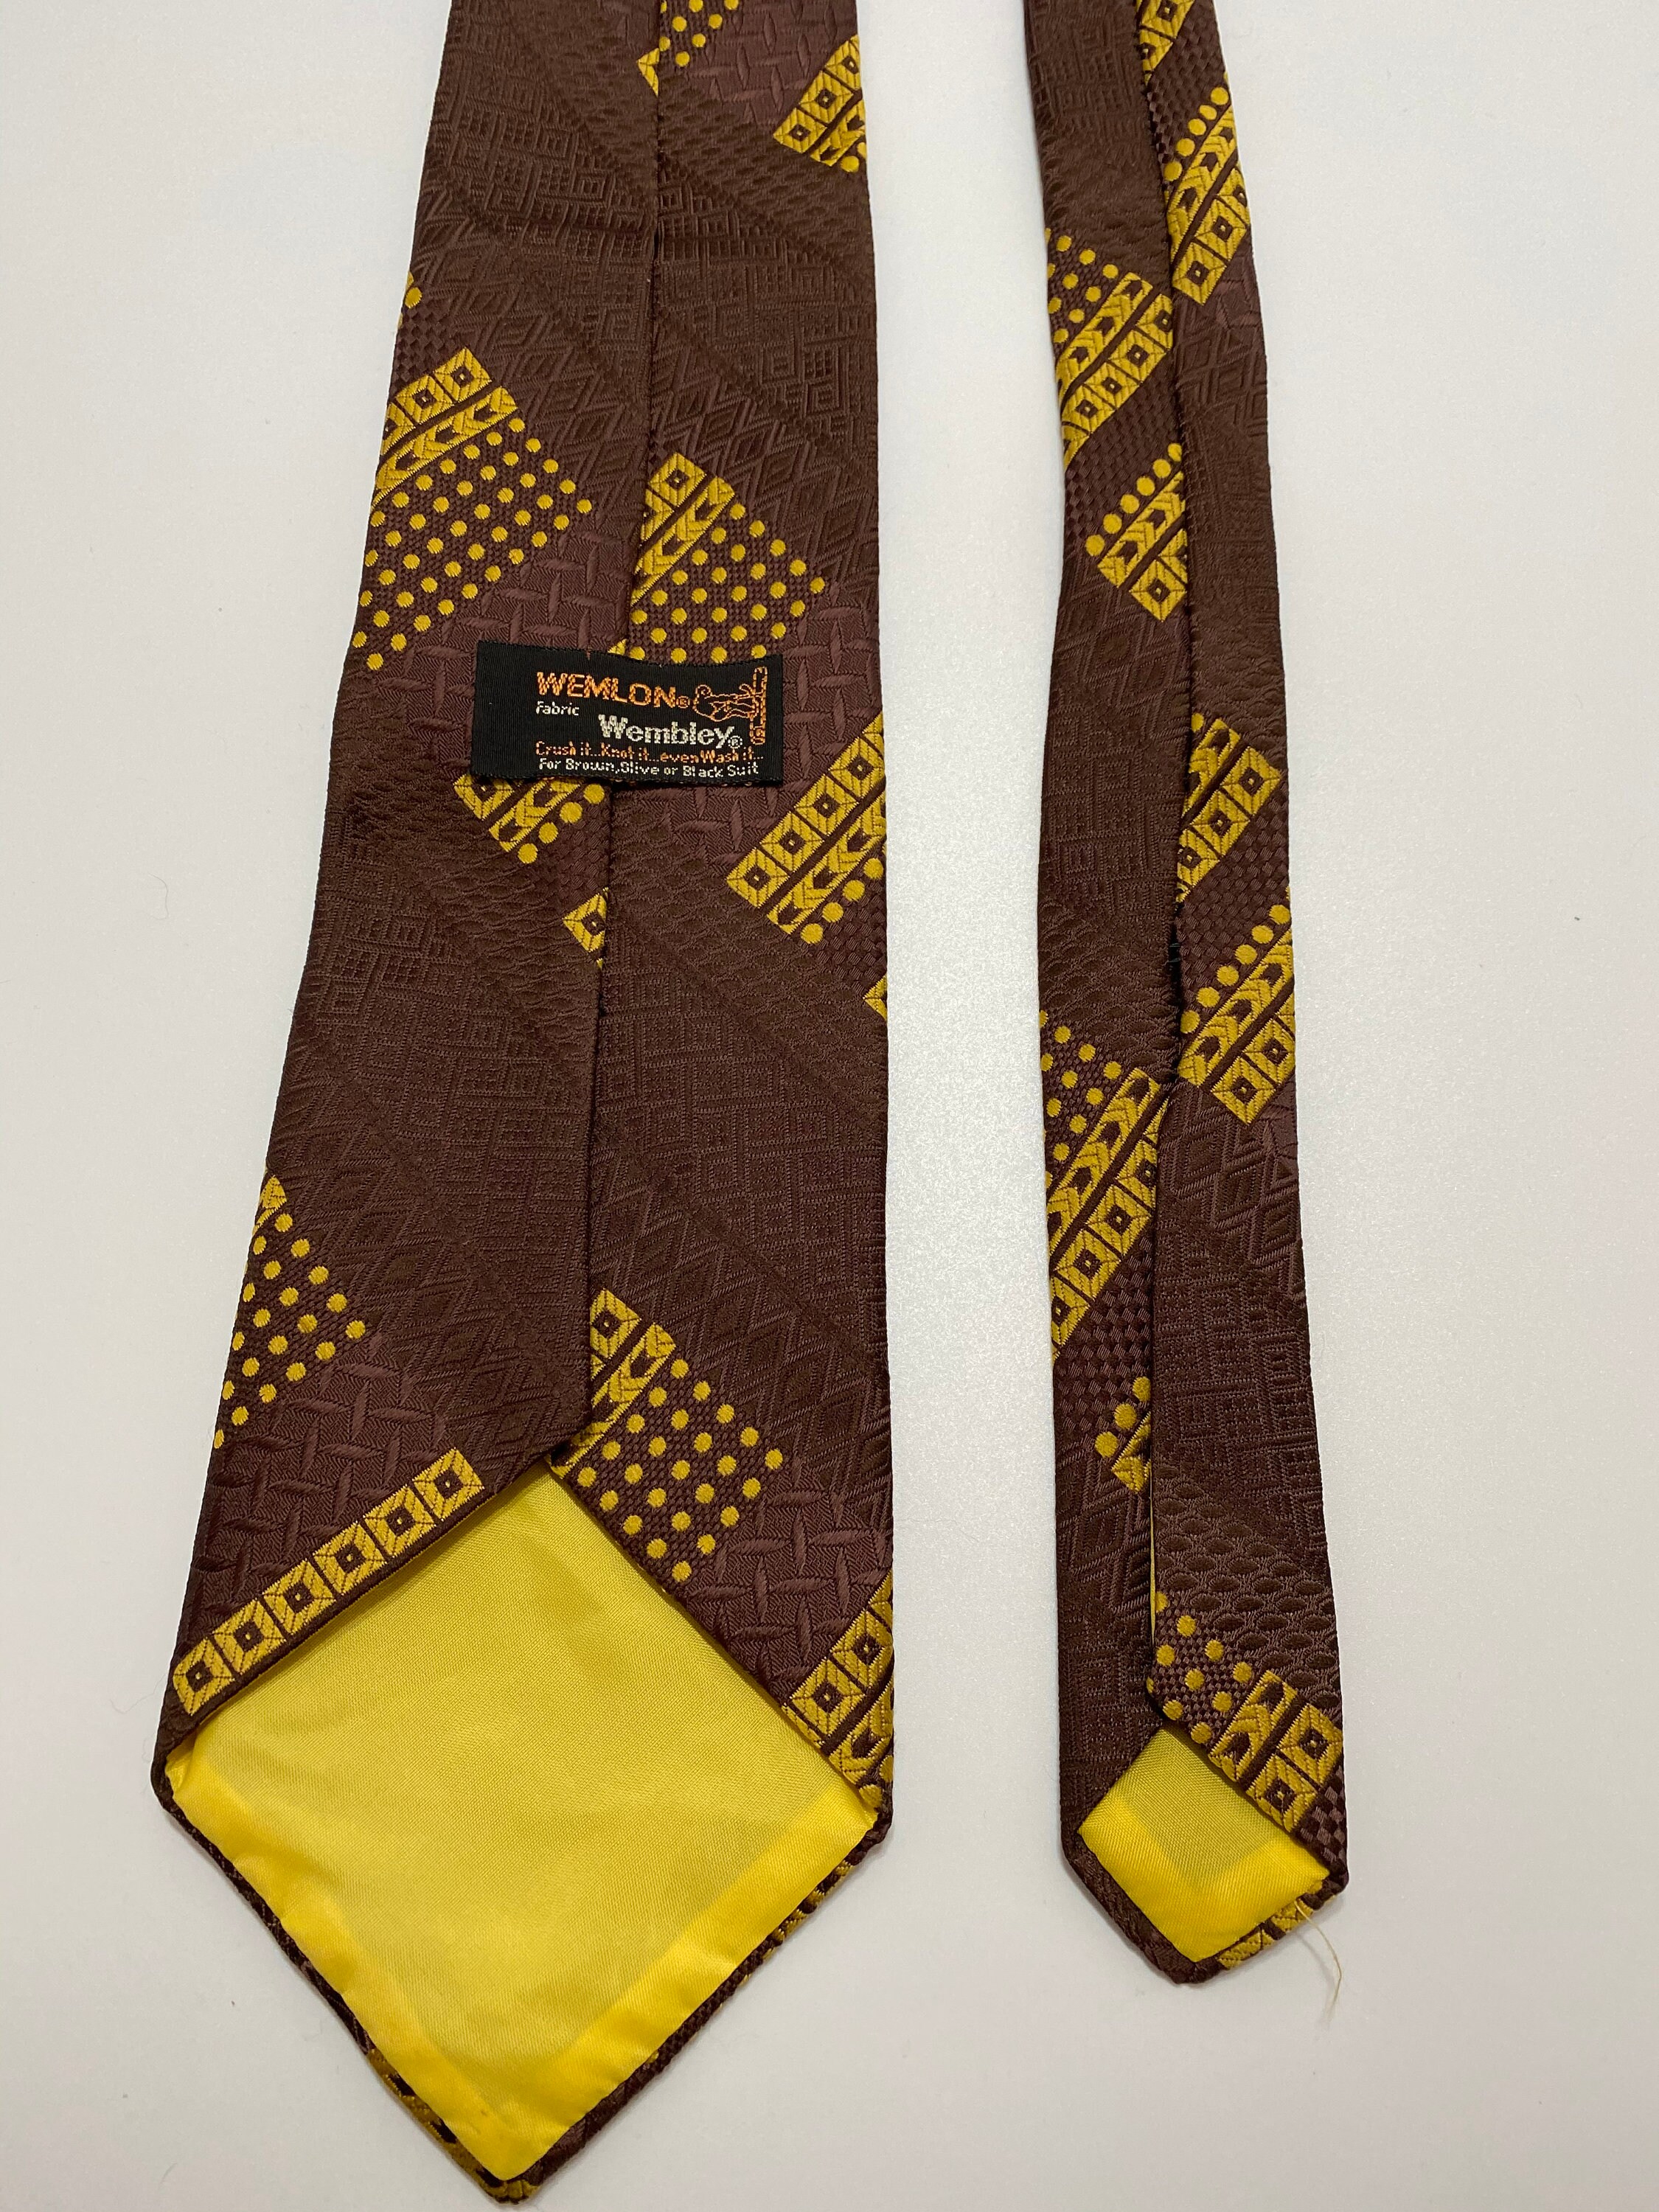 Vintage Wemlon by Wembley Brown and Yellow Print Tie 56 - Etsy